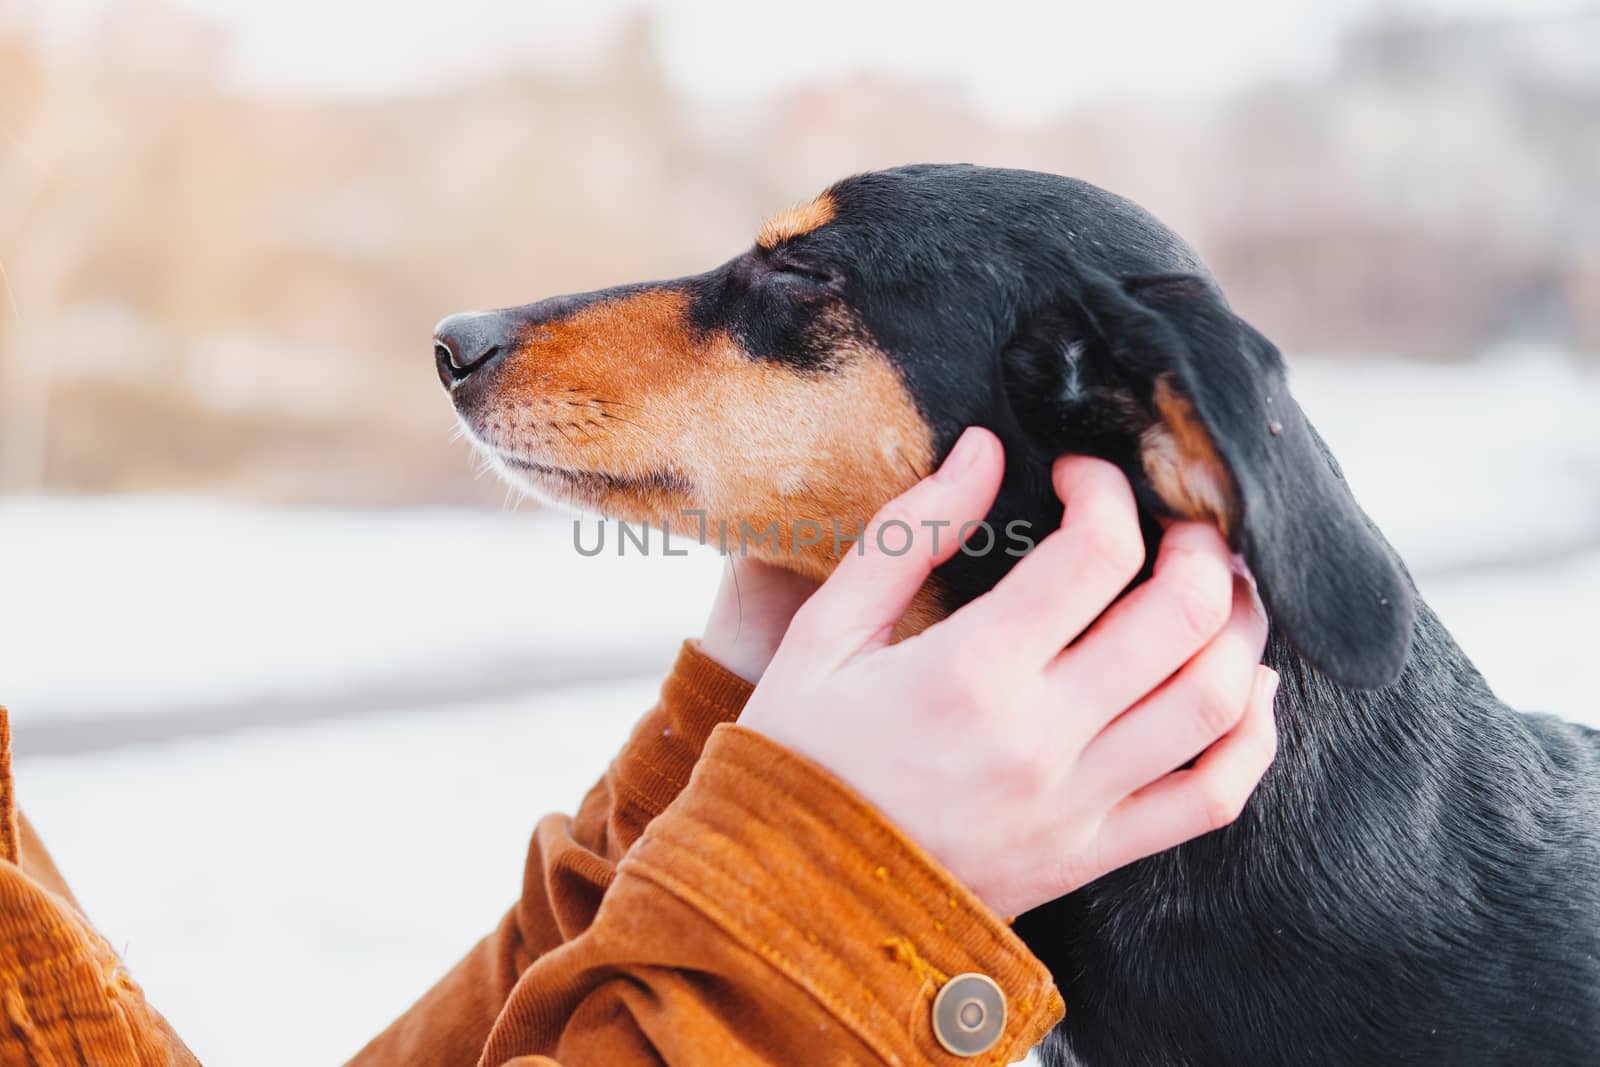 Dog enjoys ear scratches at a walk. Loving pets concept: dachshund with closed eyes getting attention of human